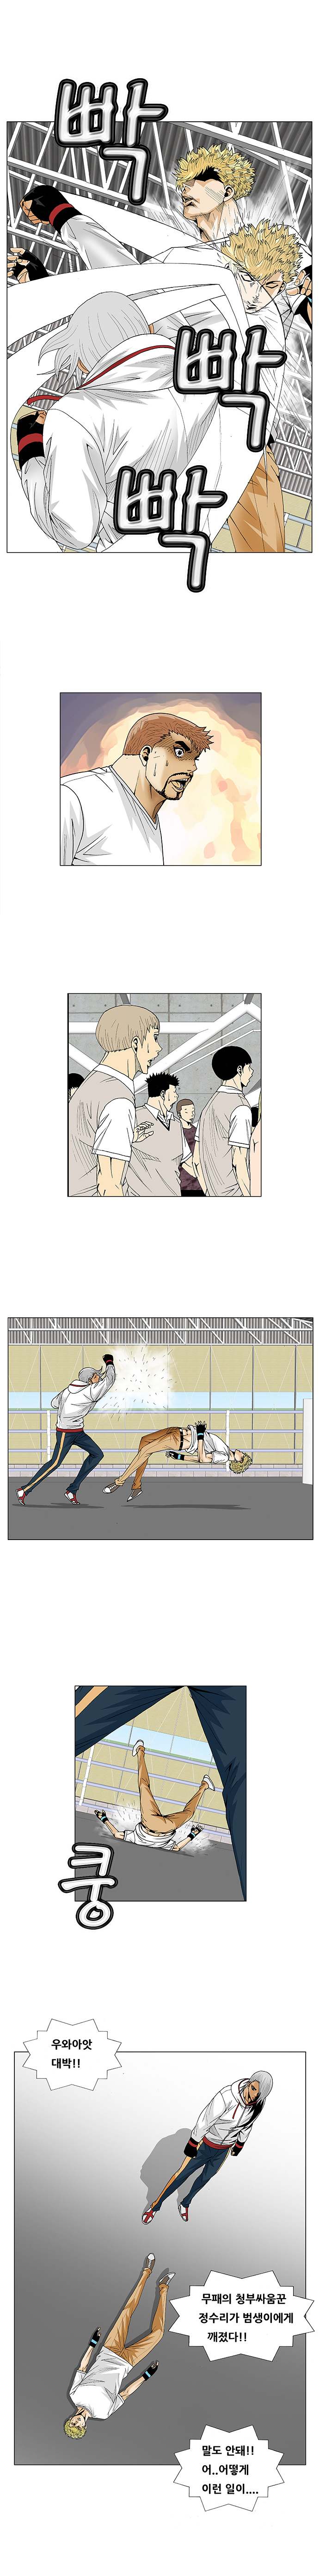 Ultimate Legend - Kang Hae Hyo - Chapter 74 - Page 3